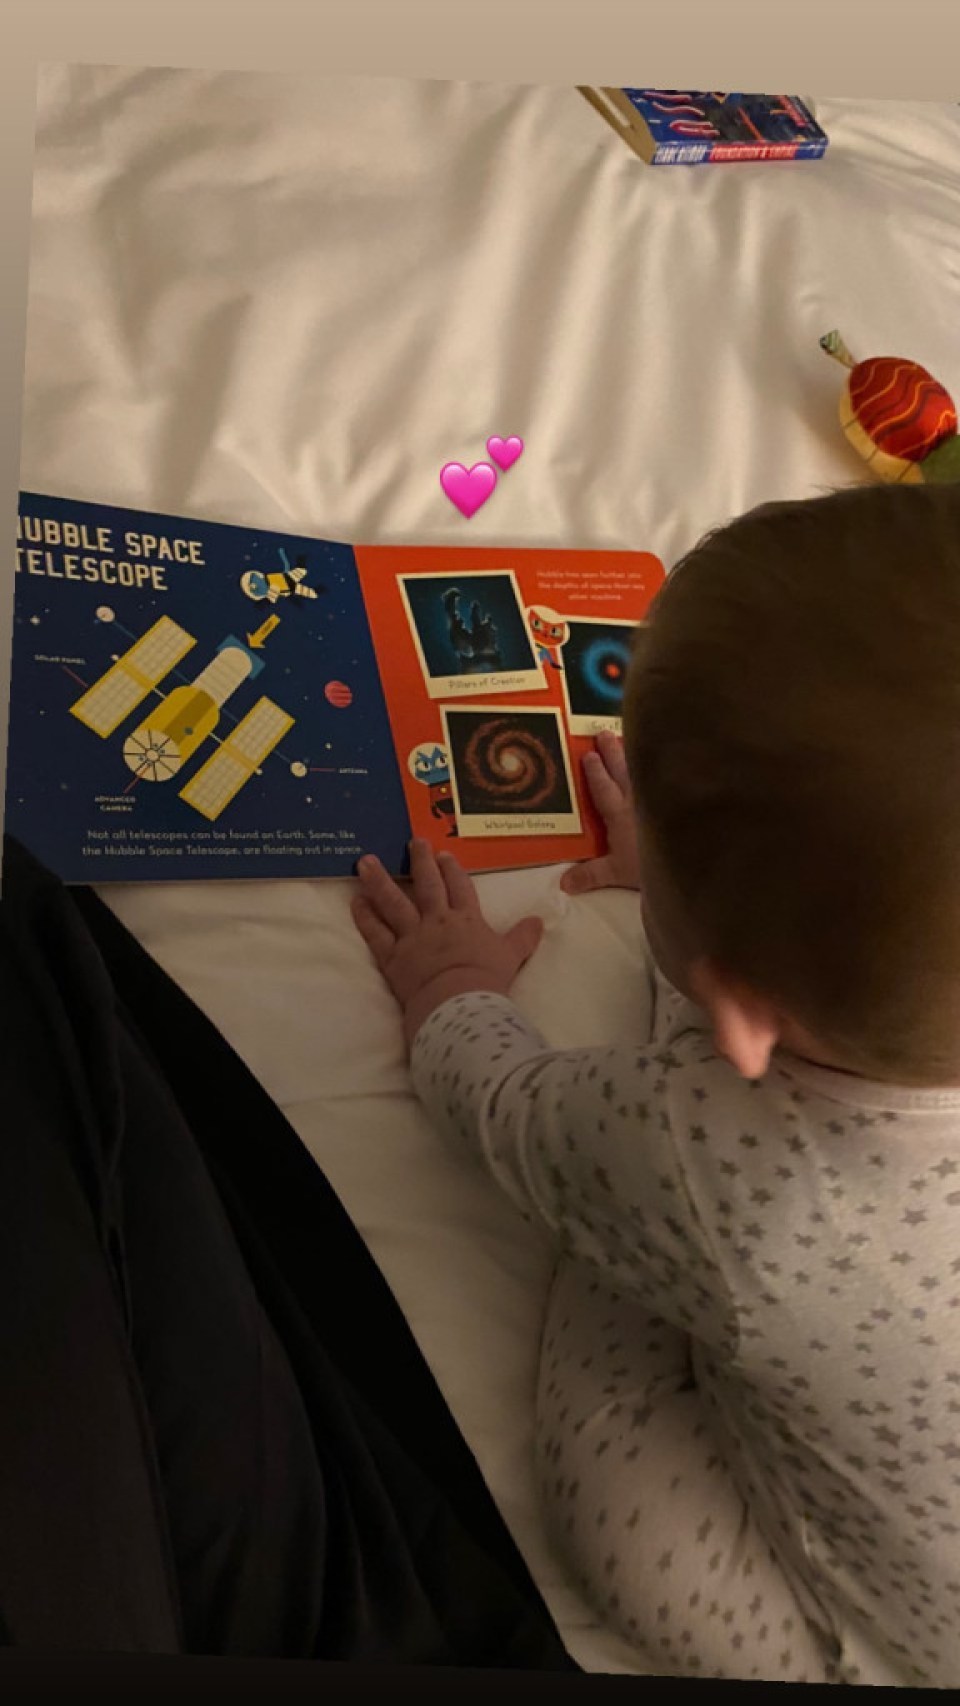 Grimes and Elon Musk's son X AE A-Xii playing with space book 